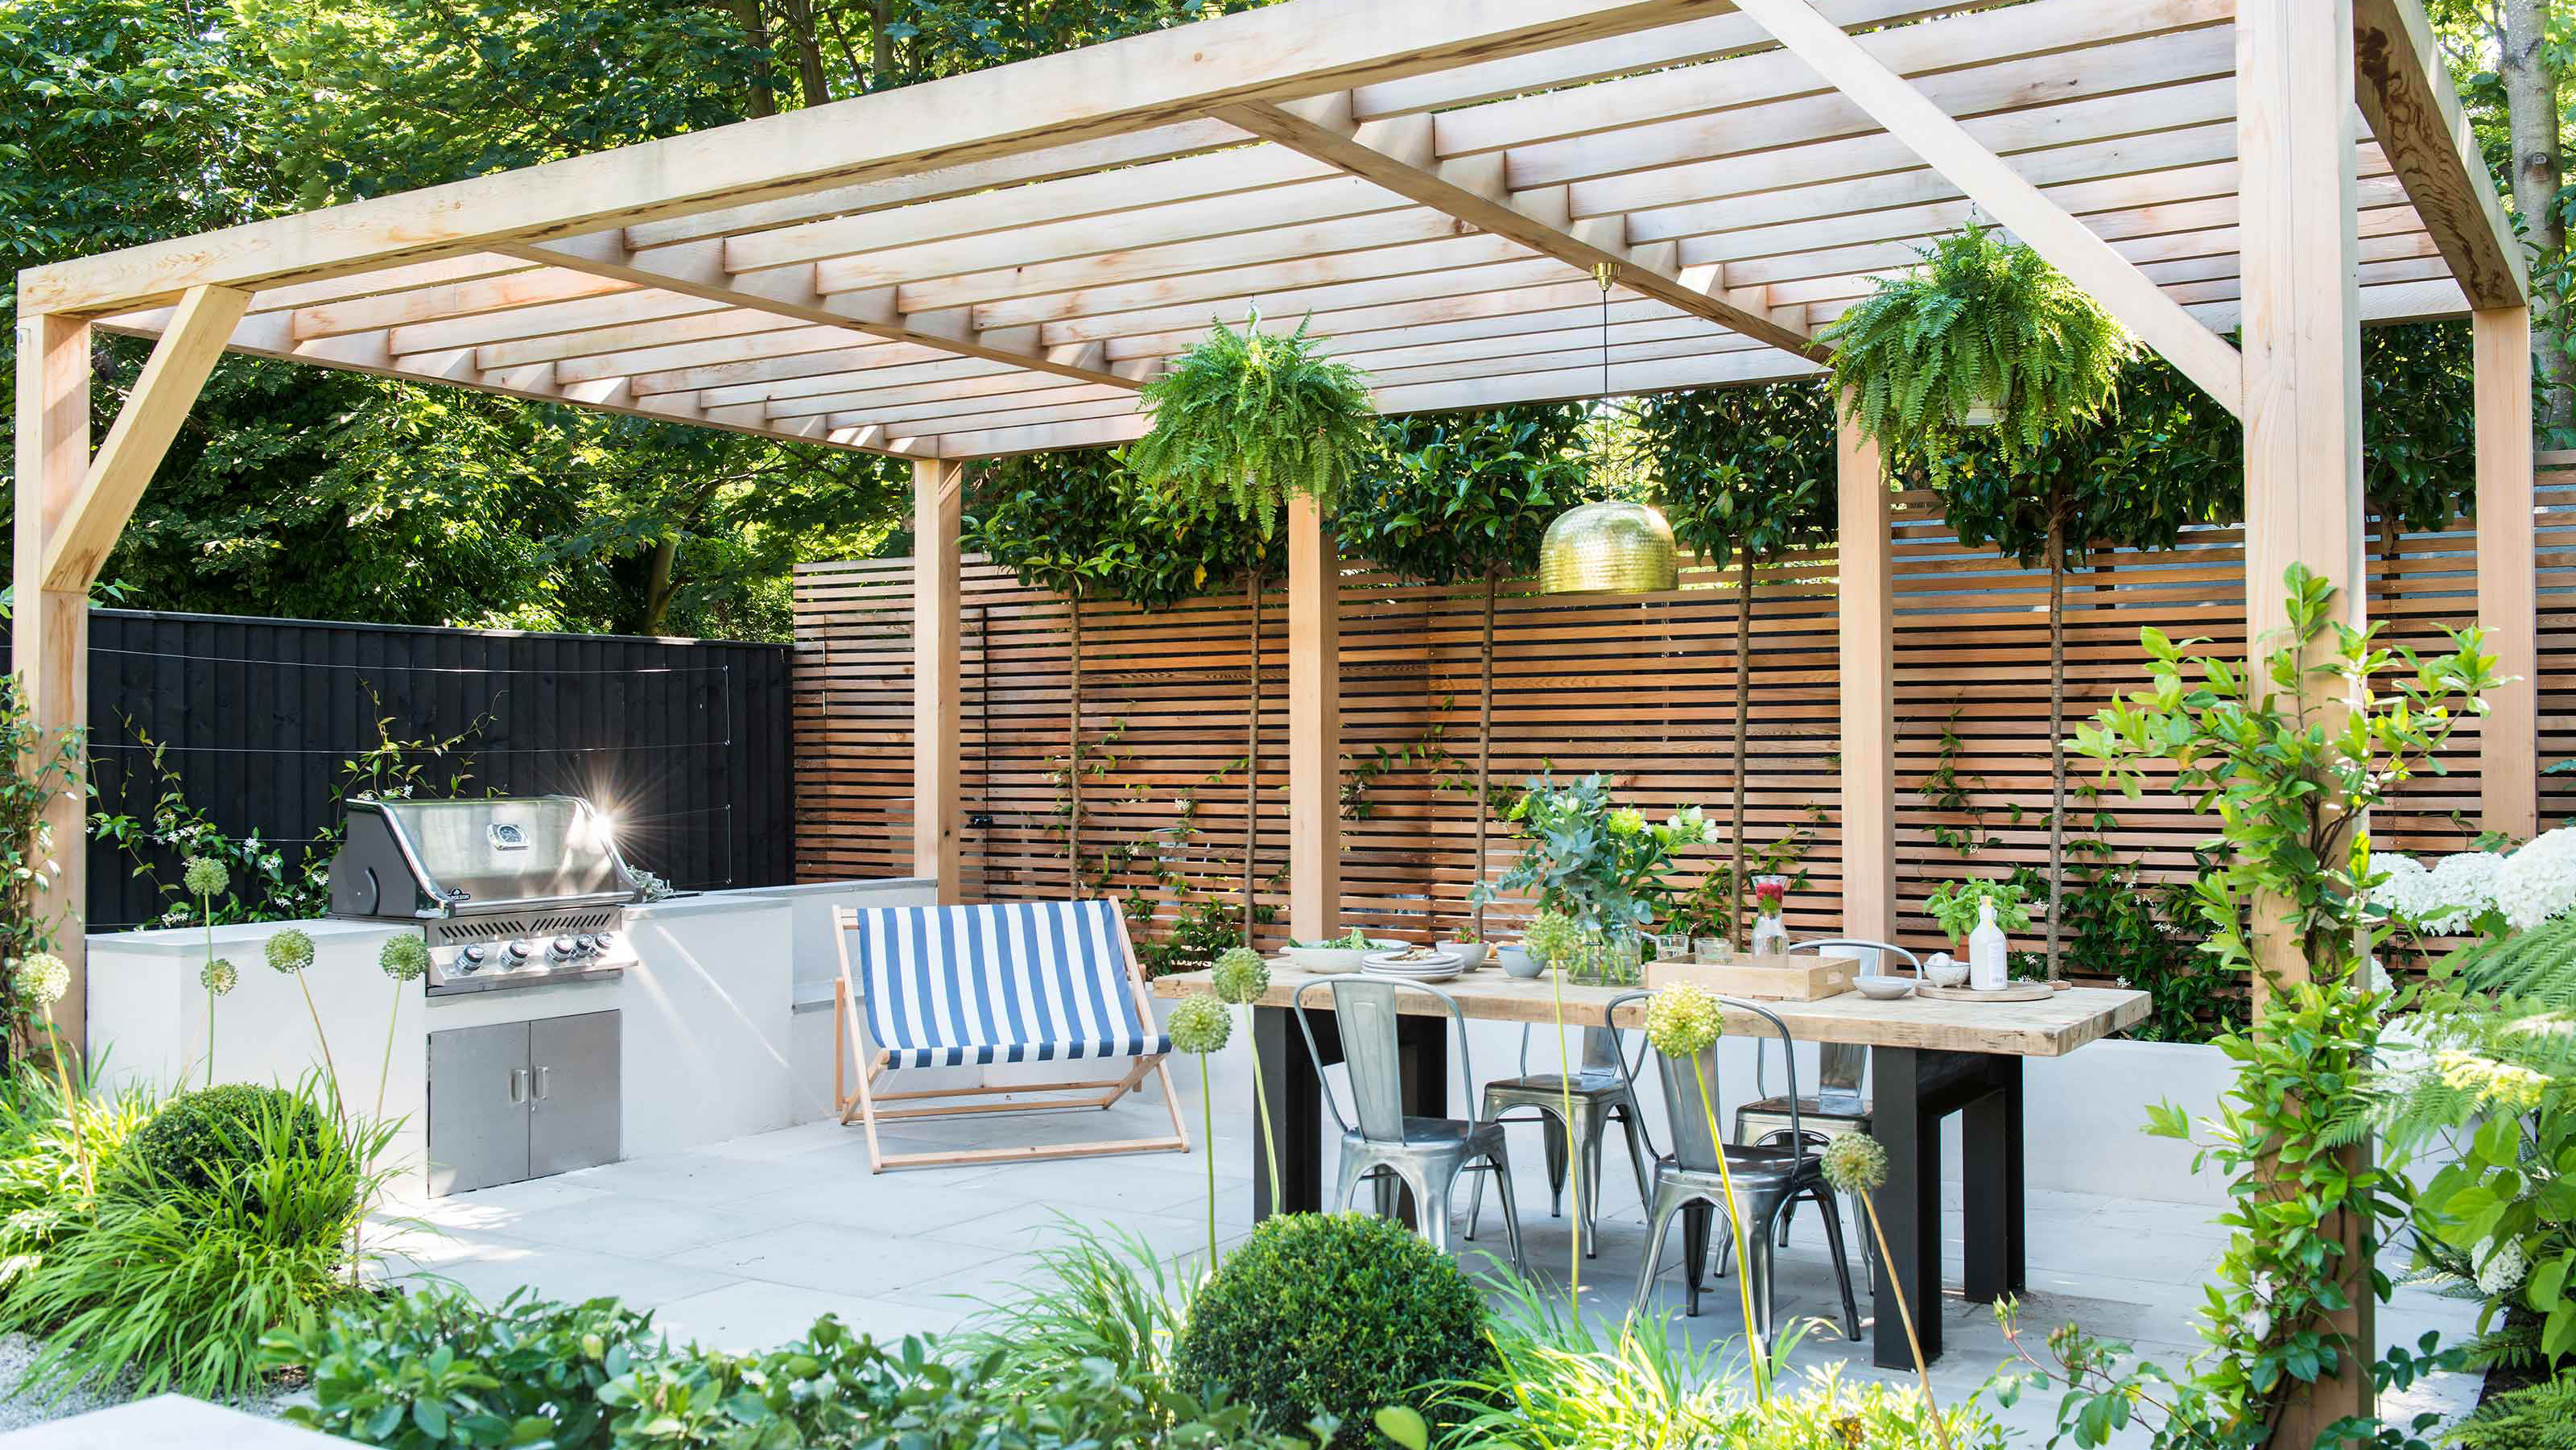 Pergola ideas: 21 stunning garden structures for added style and shade